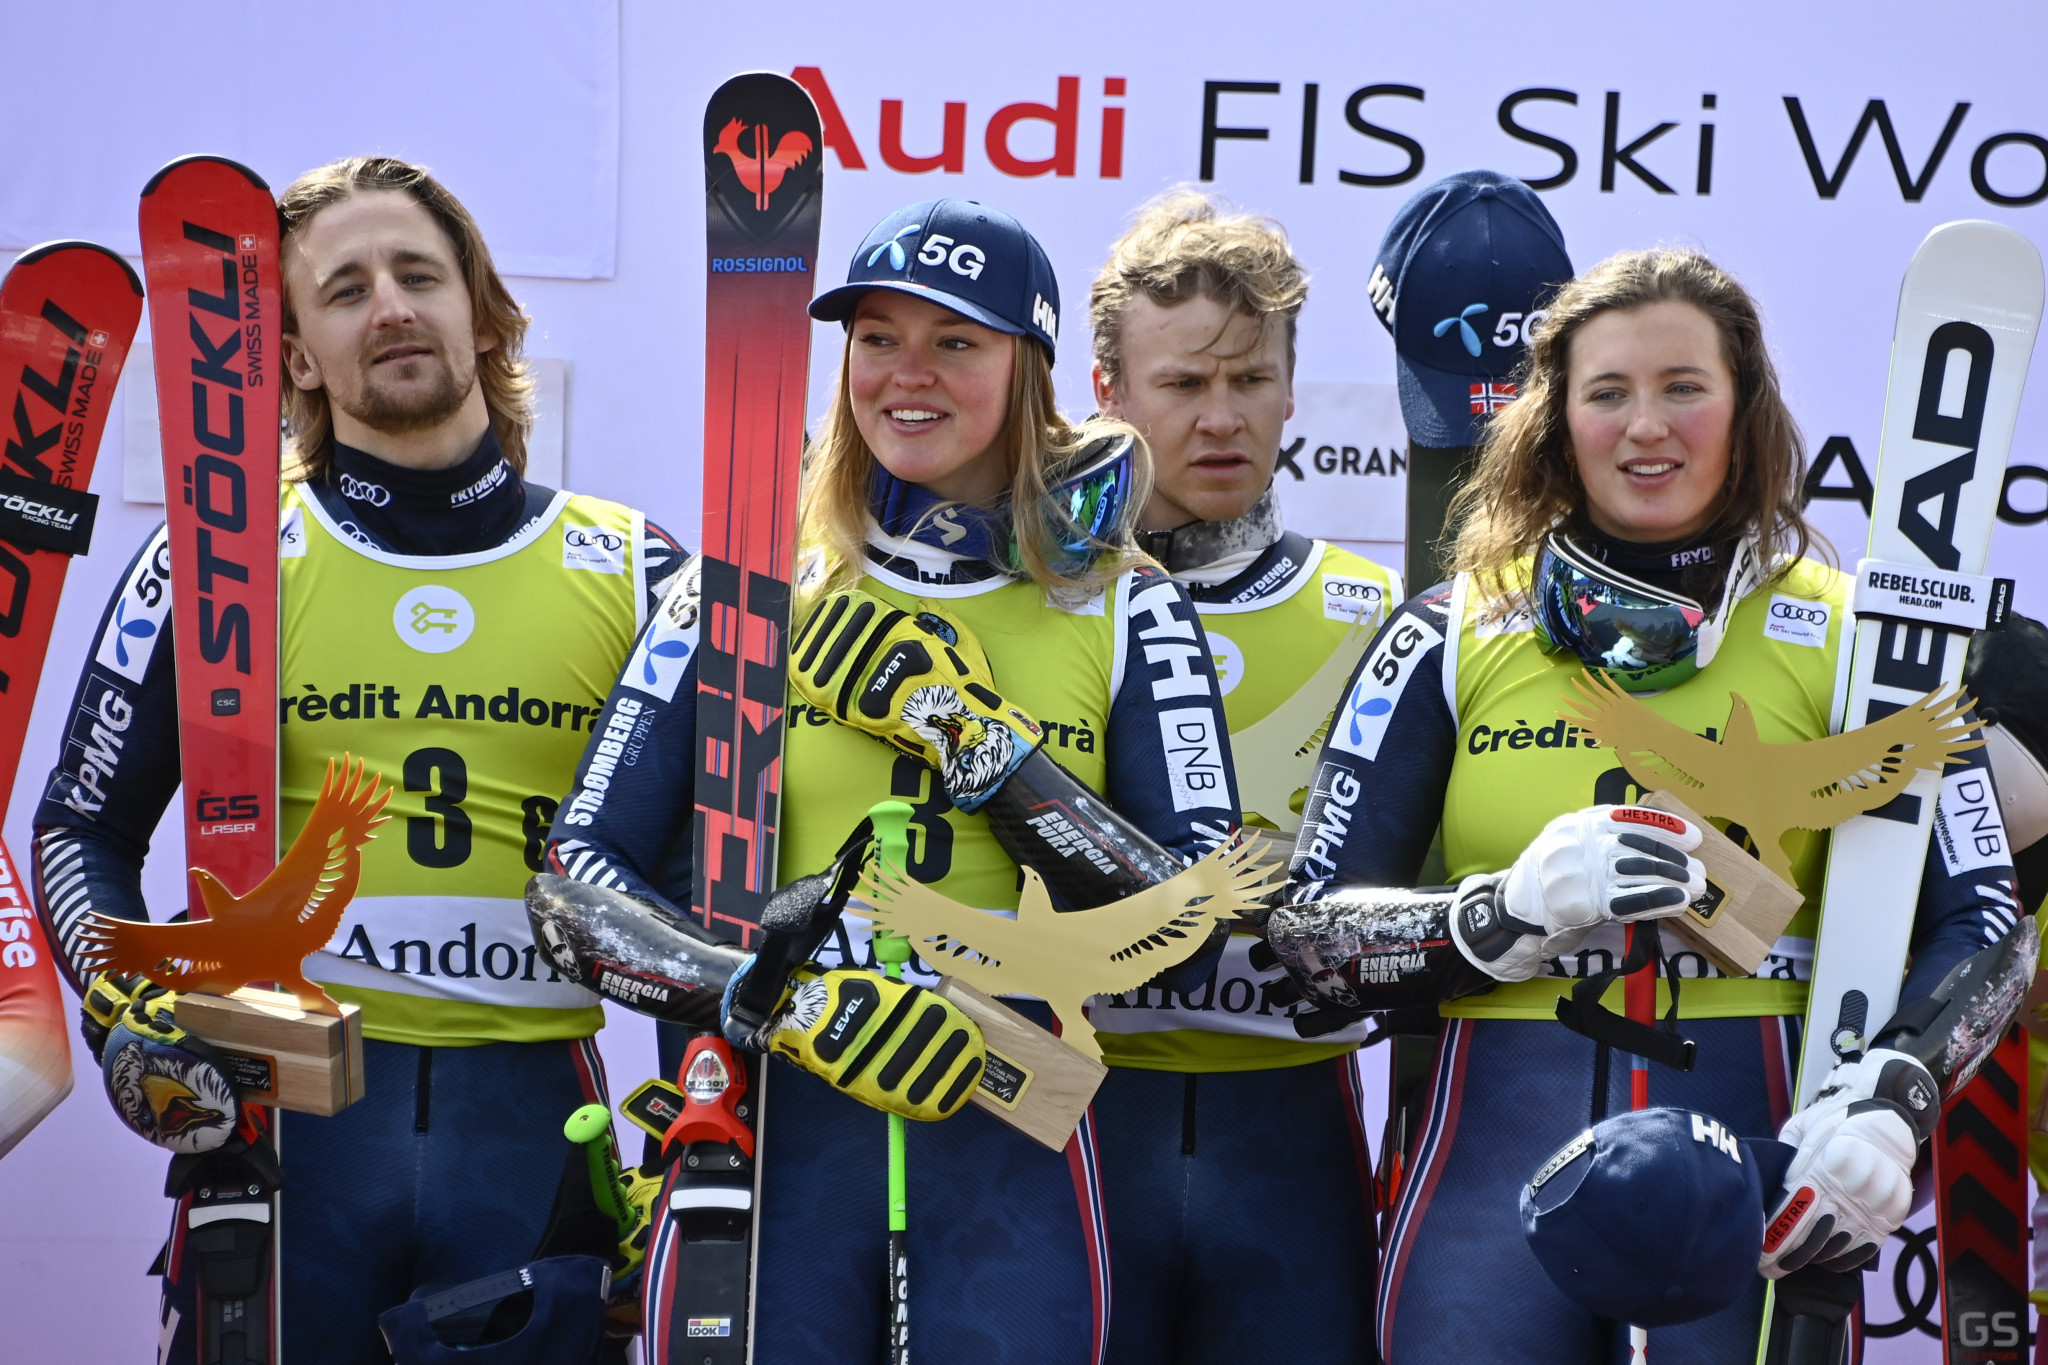 Norway claim another parallel title at Alpine Skiing World Cup in Soldeu